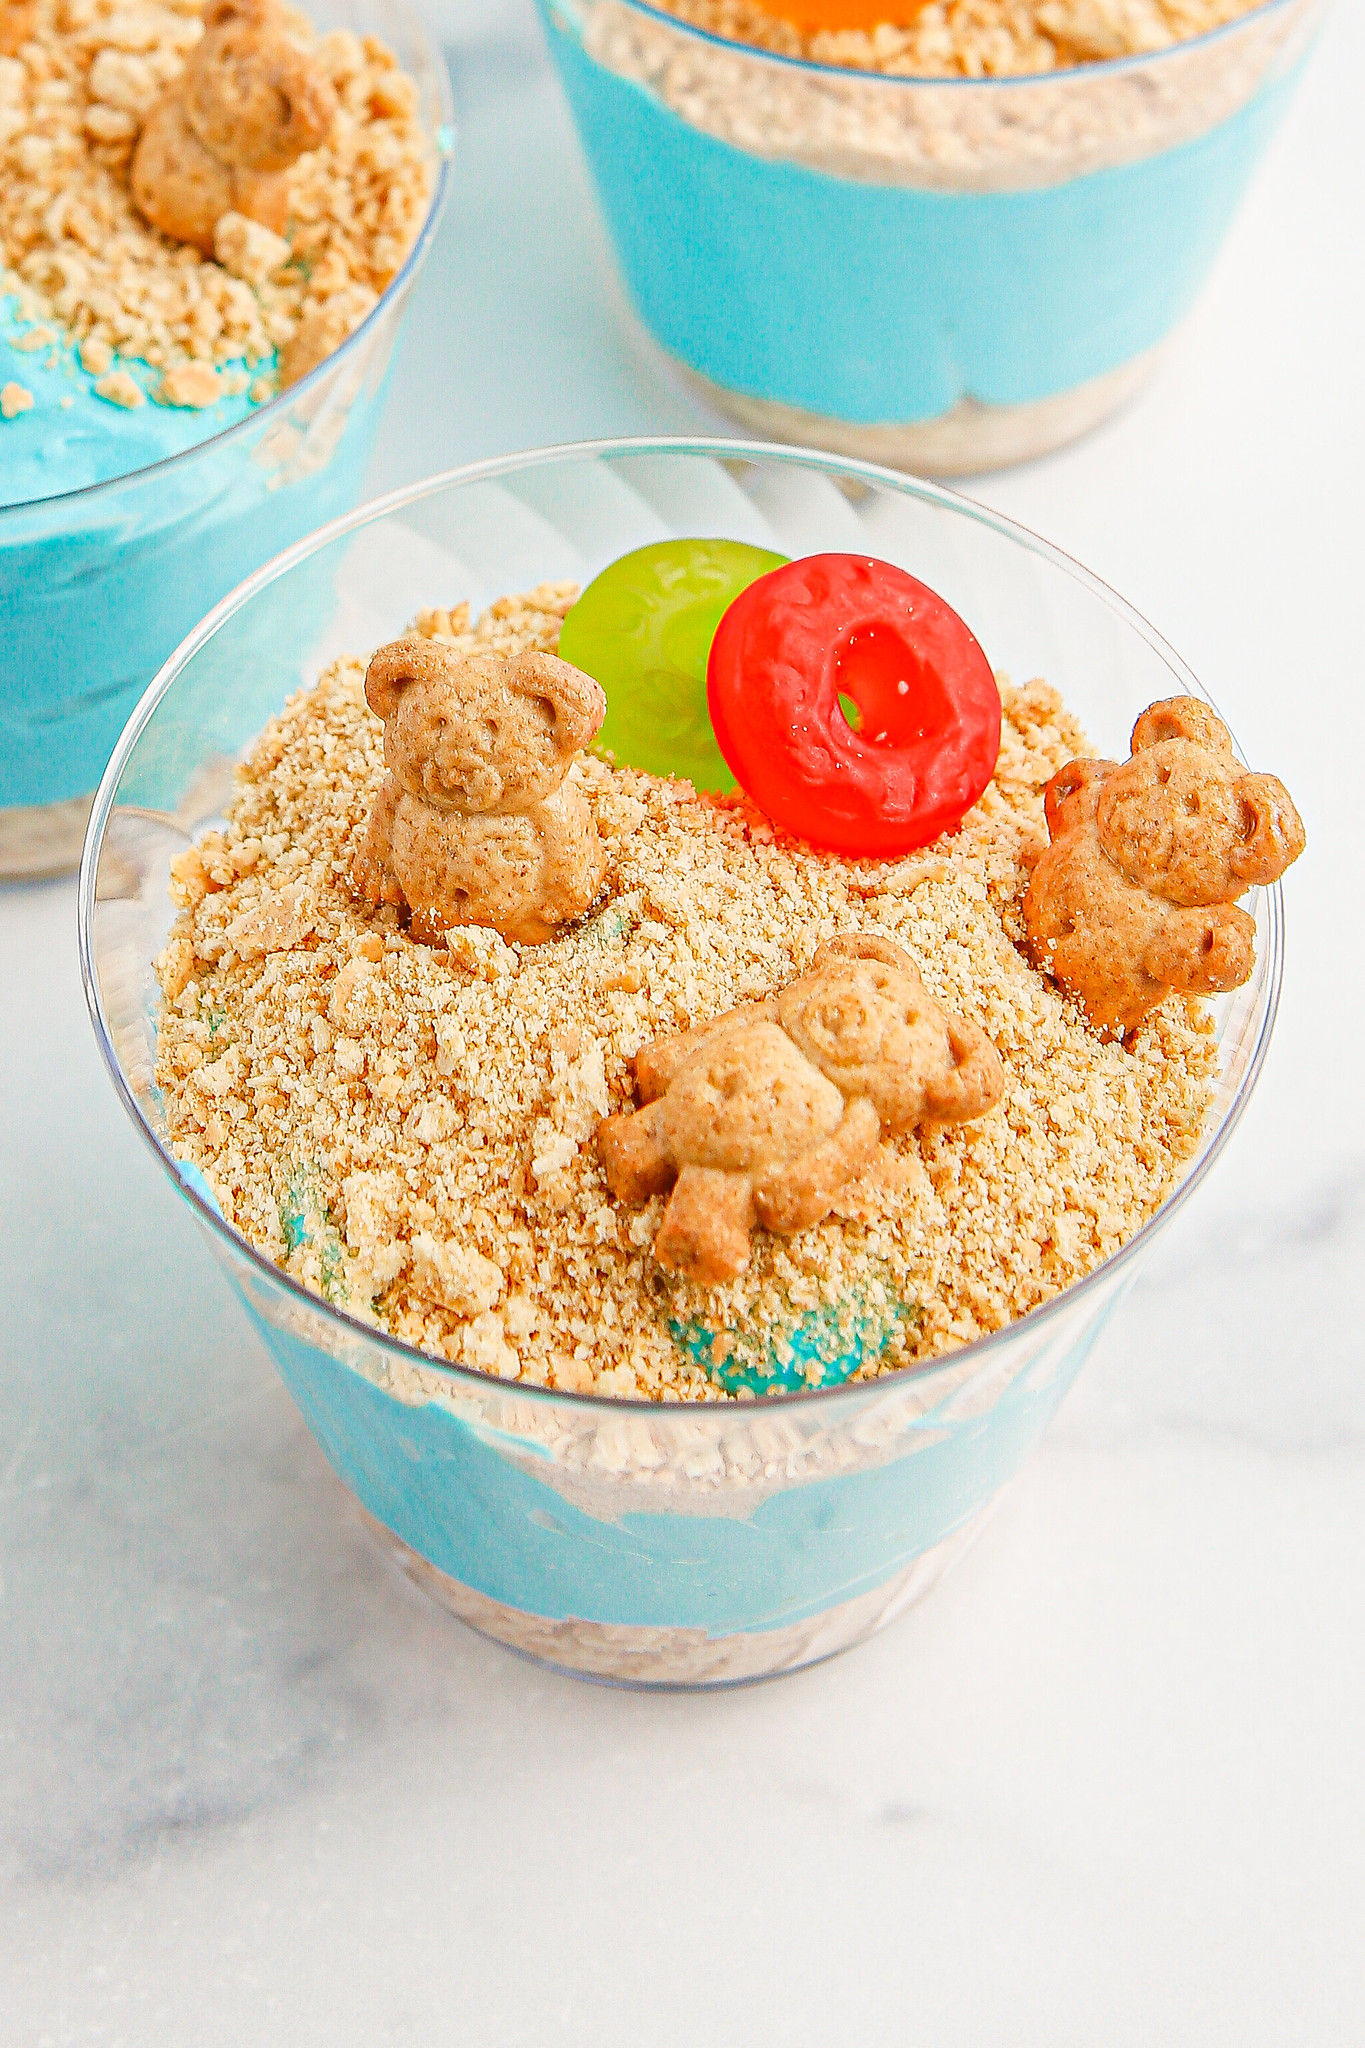 3 Teddy Grahams on top of a pudding cup with graham cracker crumbs